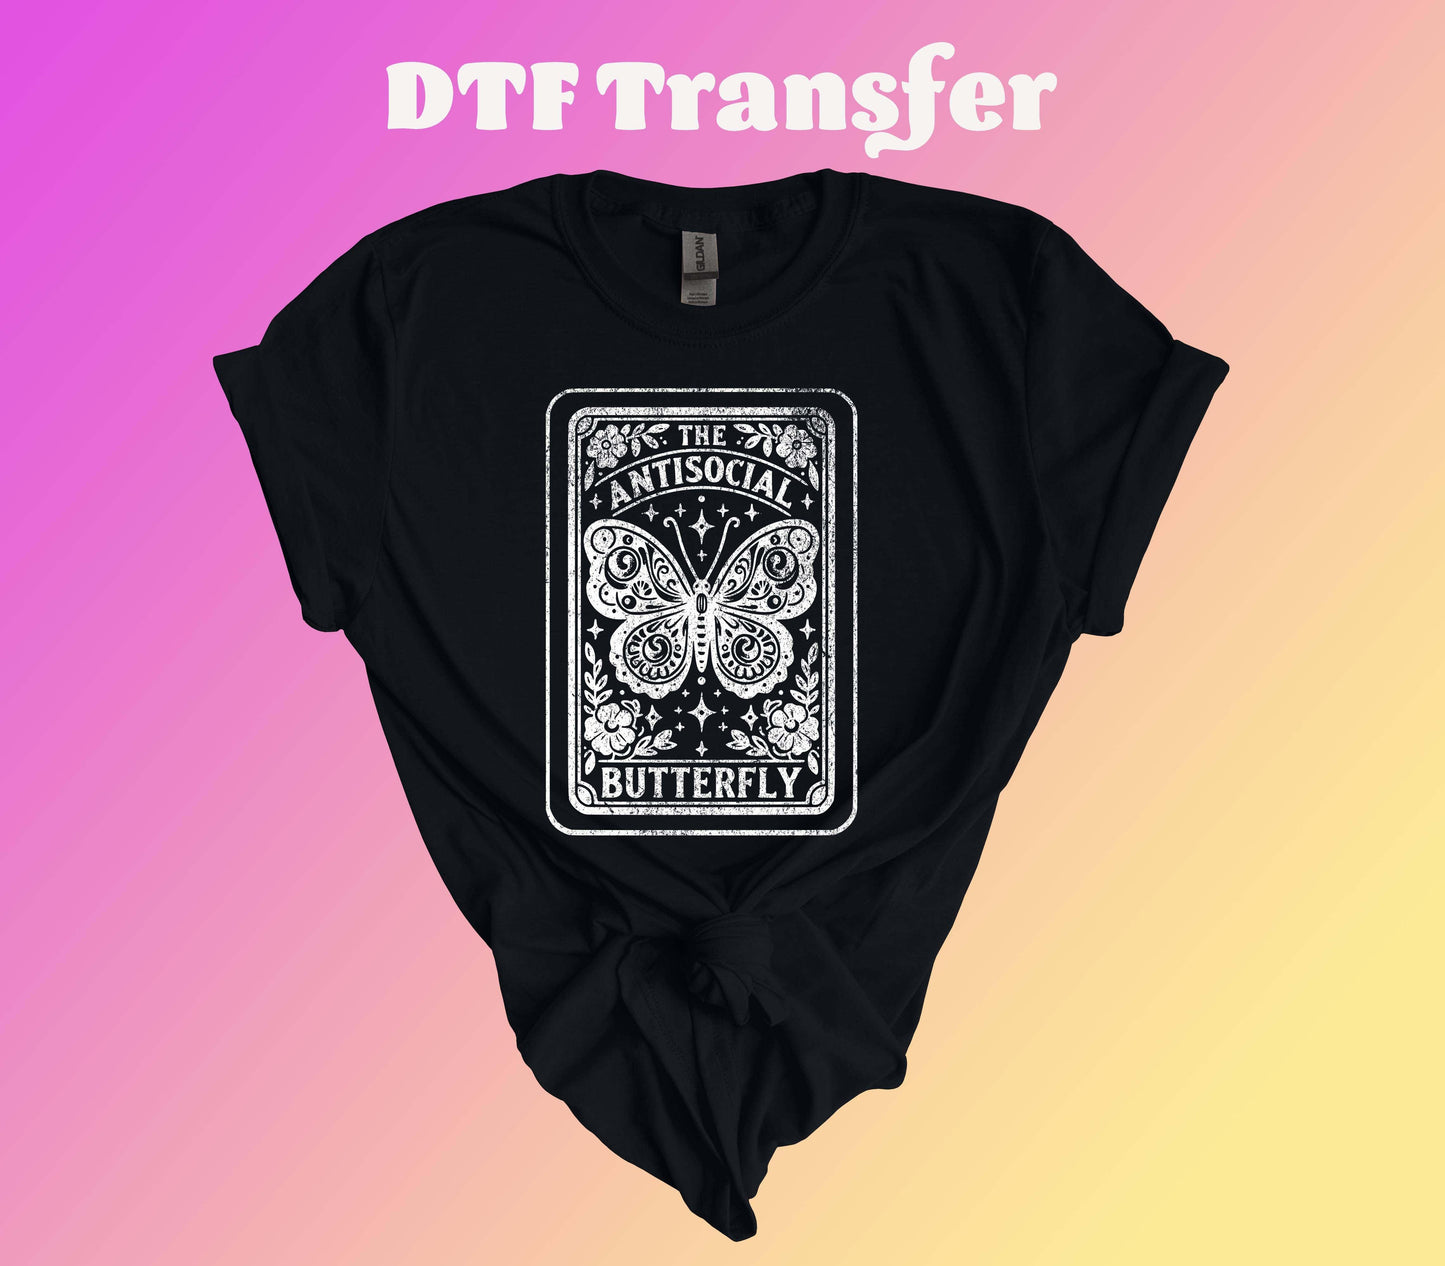 Antisocial Butterfly DTF Transfer - Imagine With Aloha